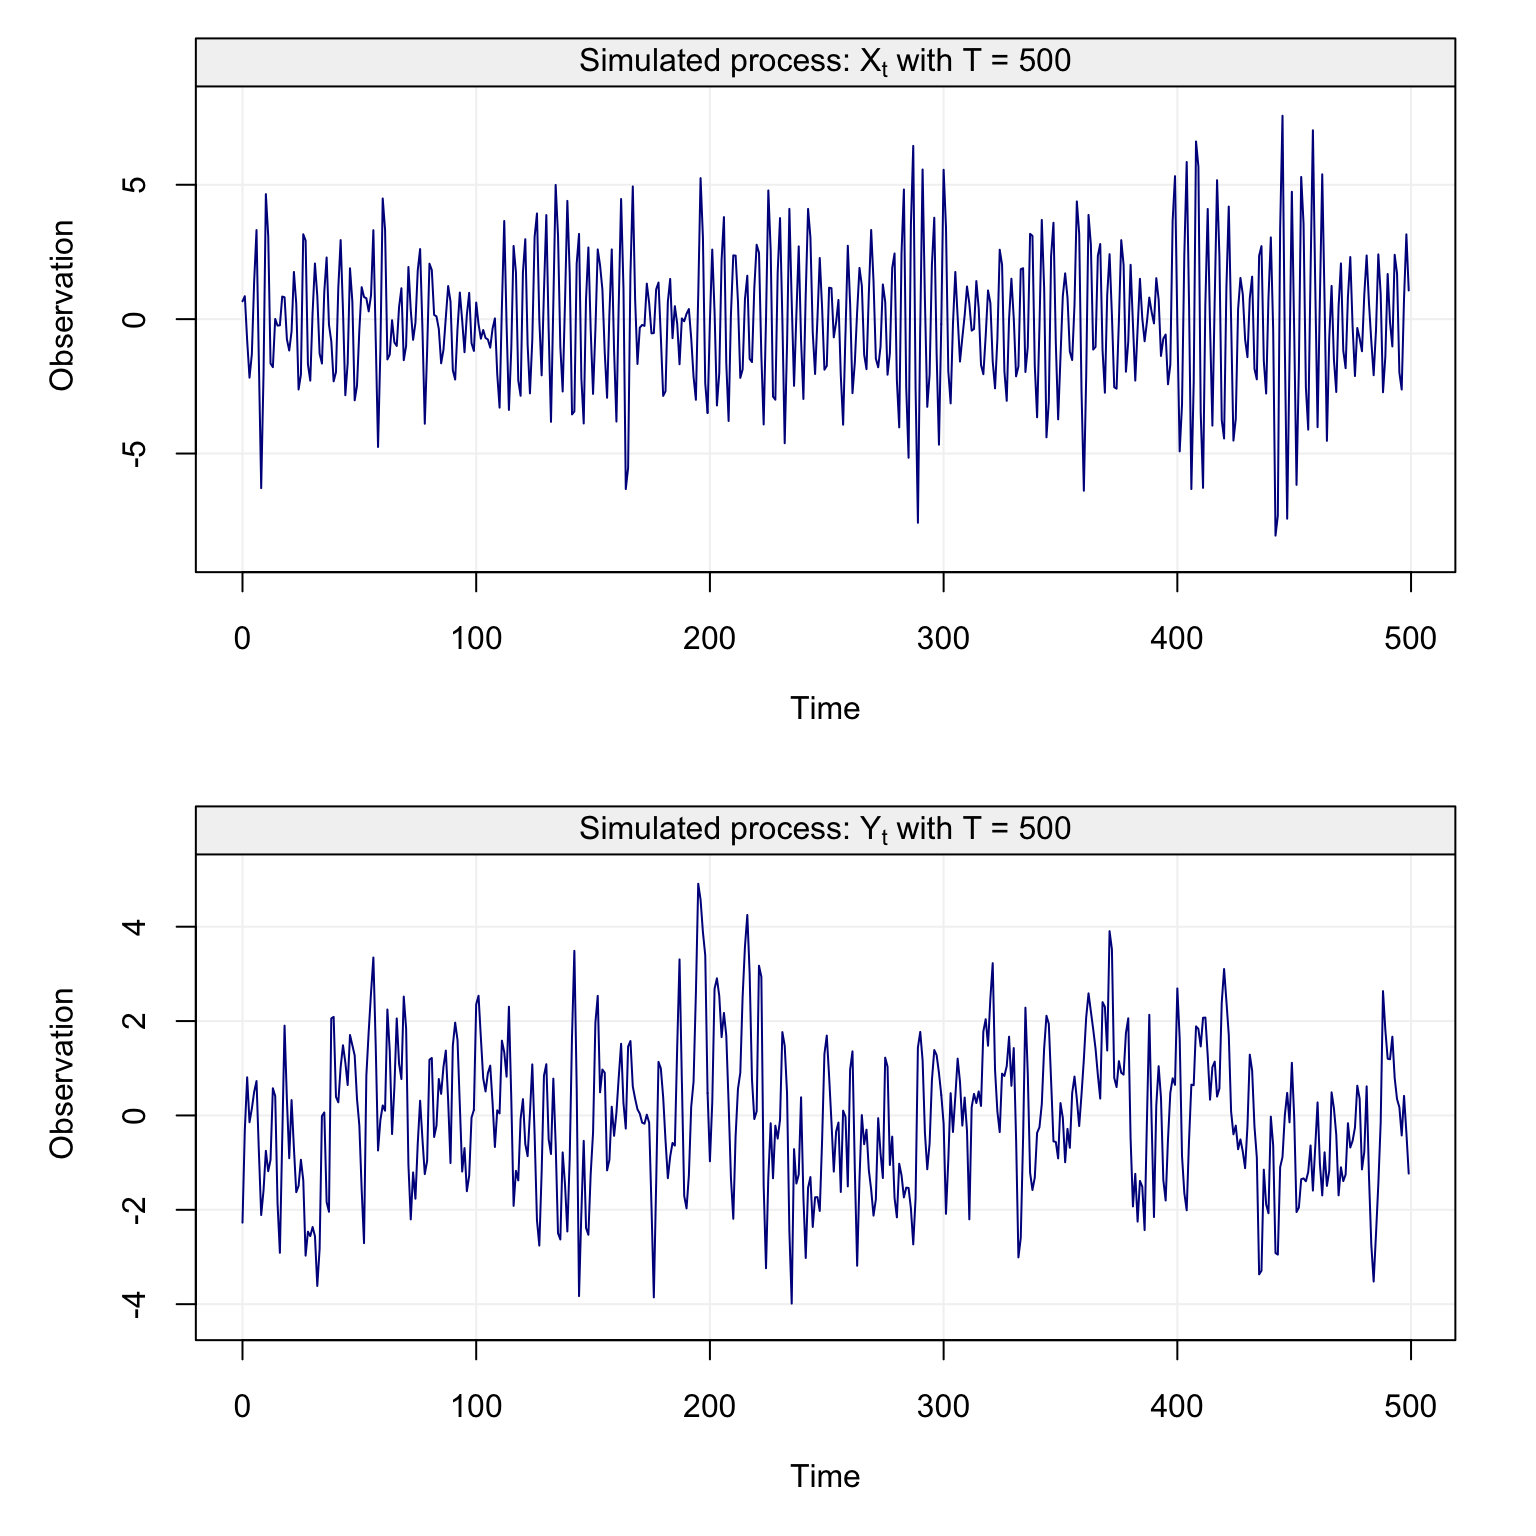 Plots of simulated time series from an ARMA(2,1) model (top plot) and from an ARMA(2,2) model (bottom plot)